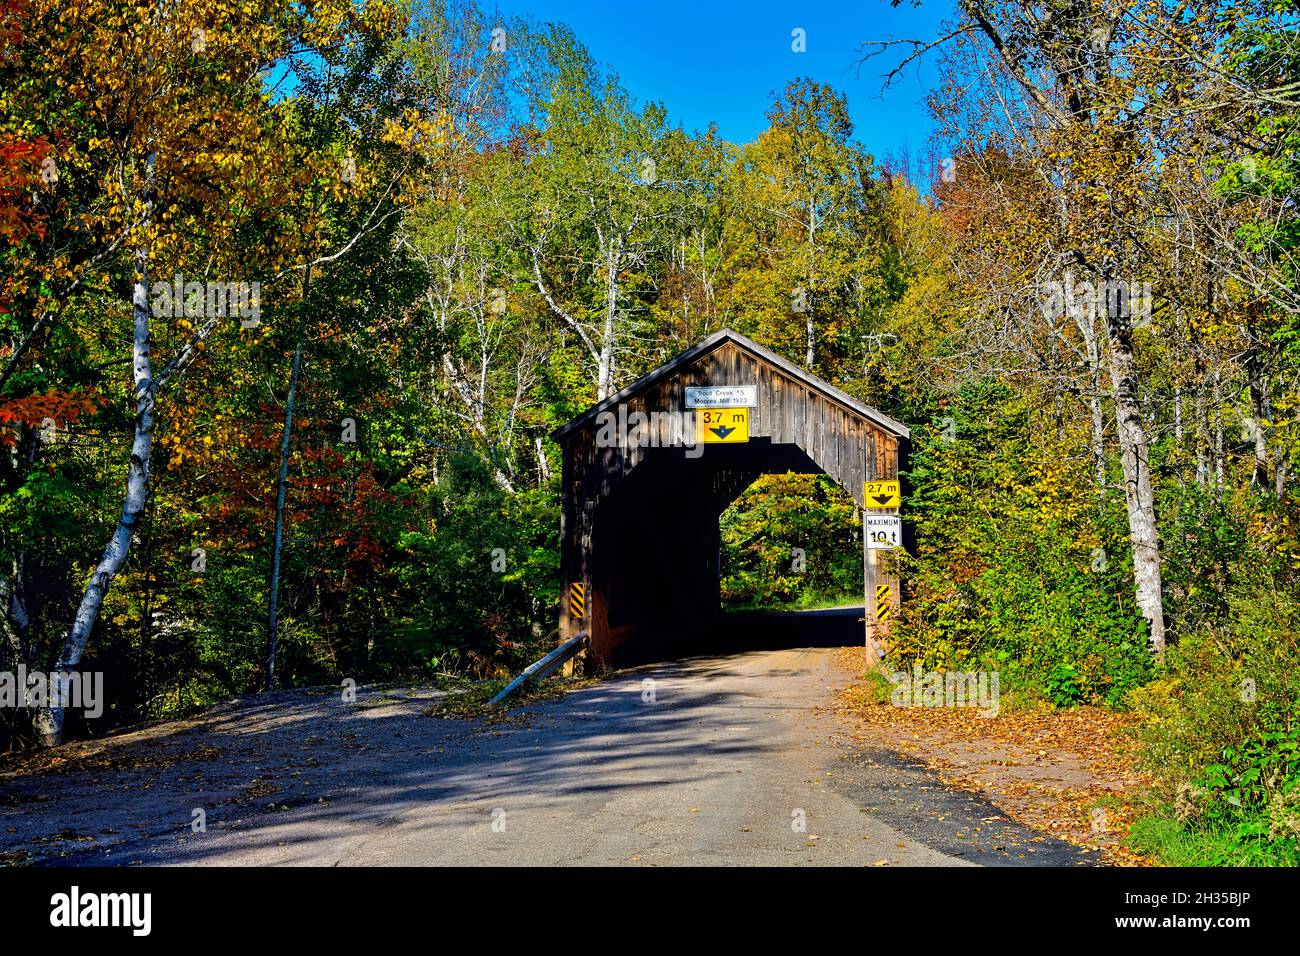 An autumn landscape image  of Trout Creek #5 covered bridge on a rural road near Waterford New Brunswick Canada. Stock Photo